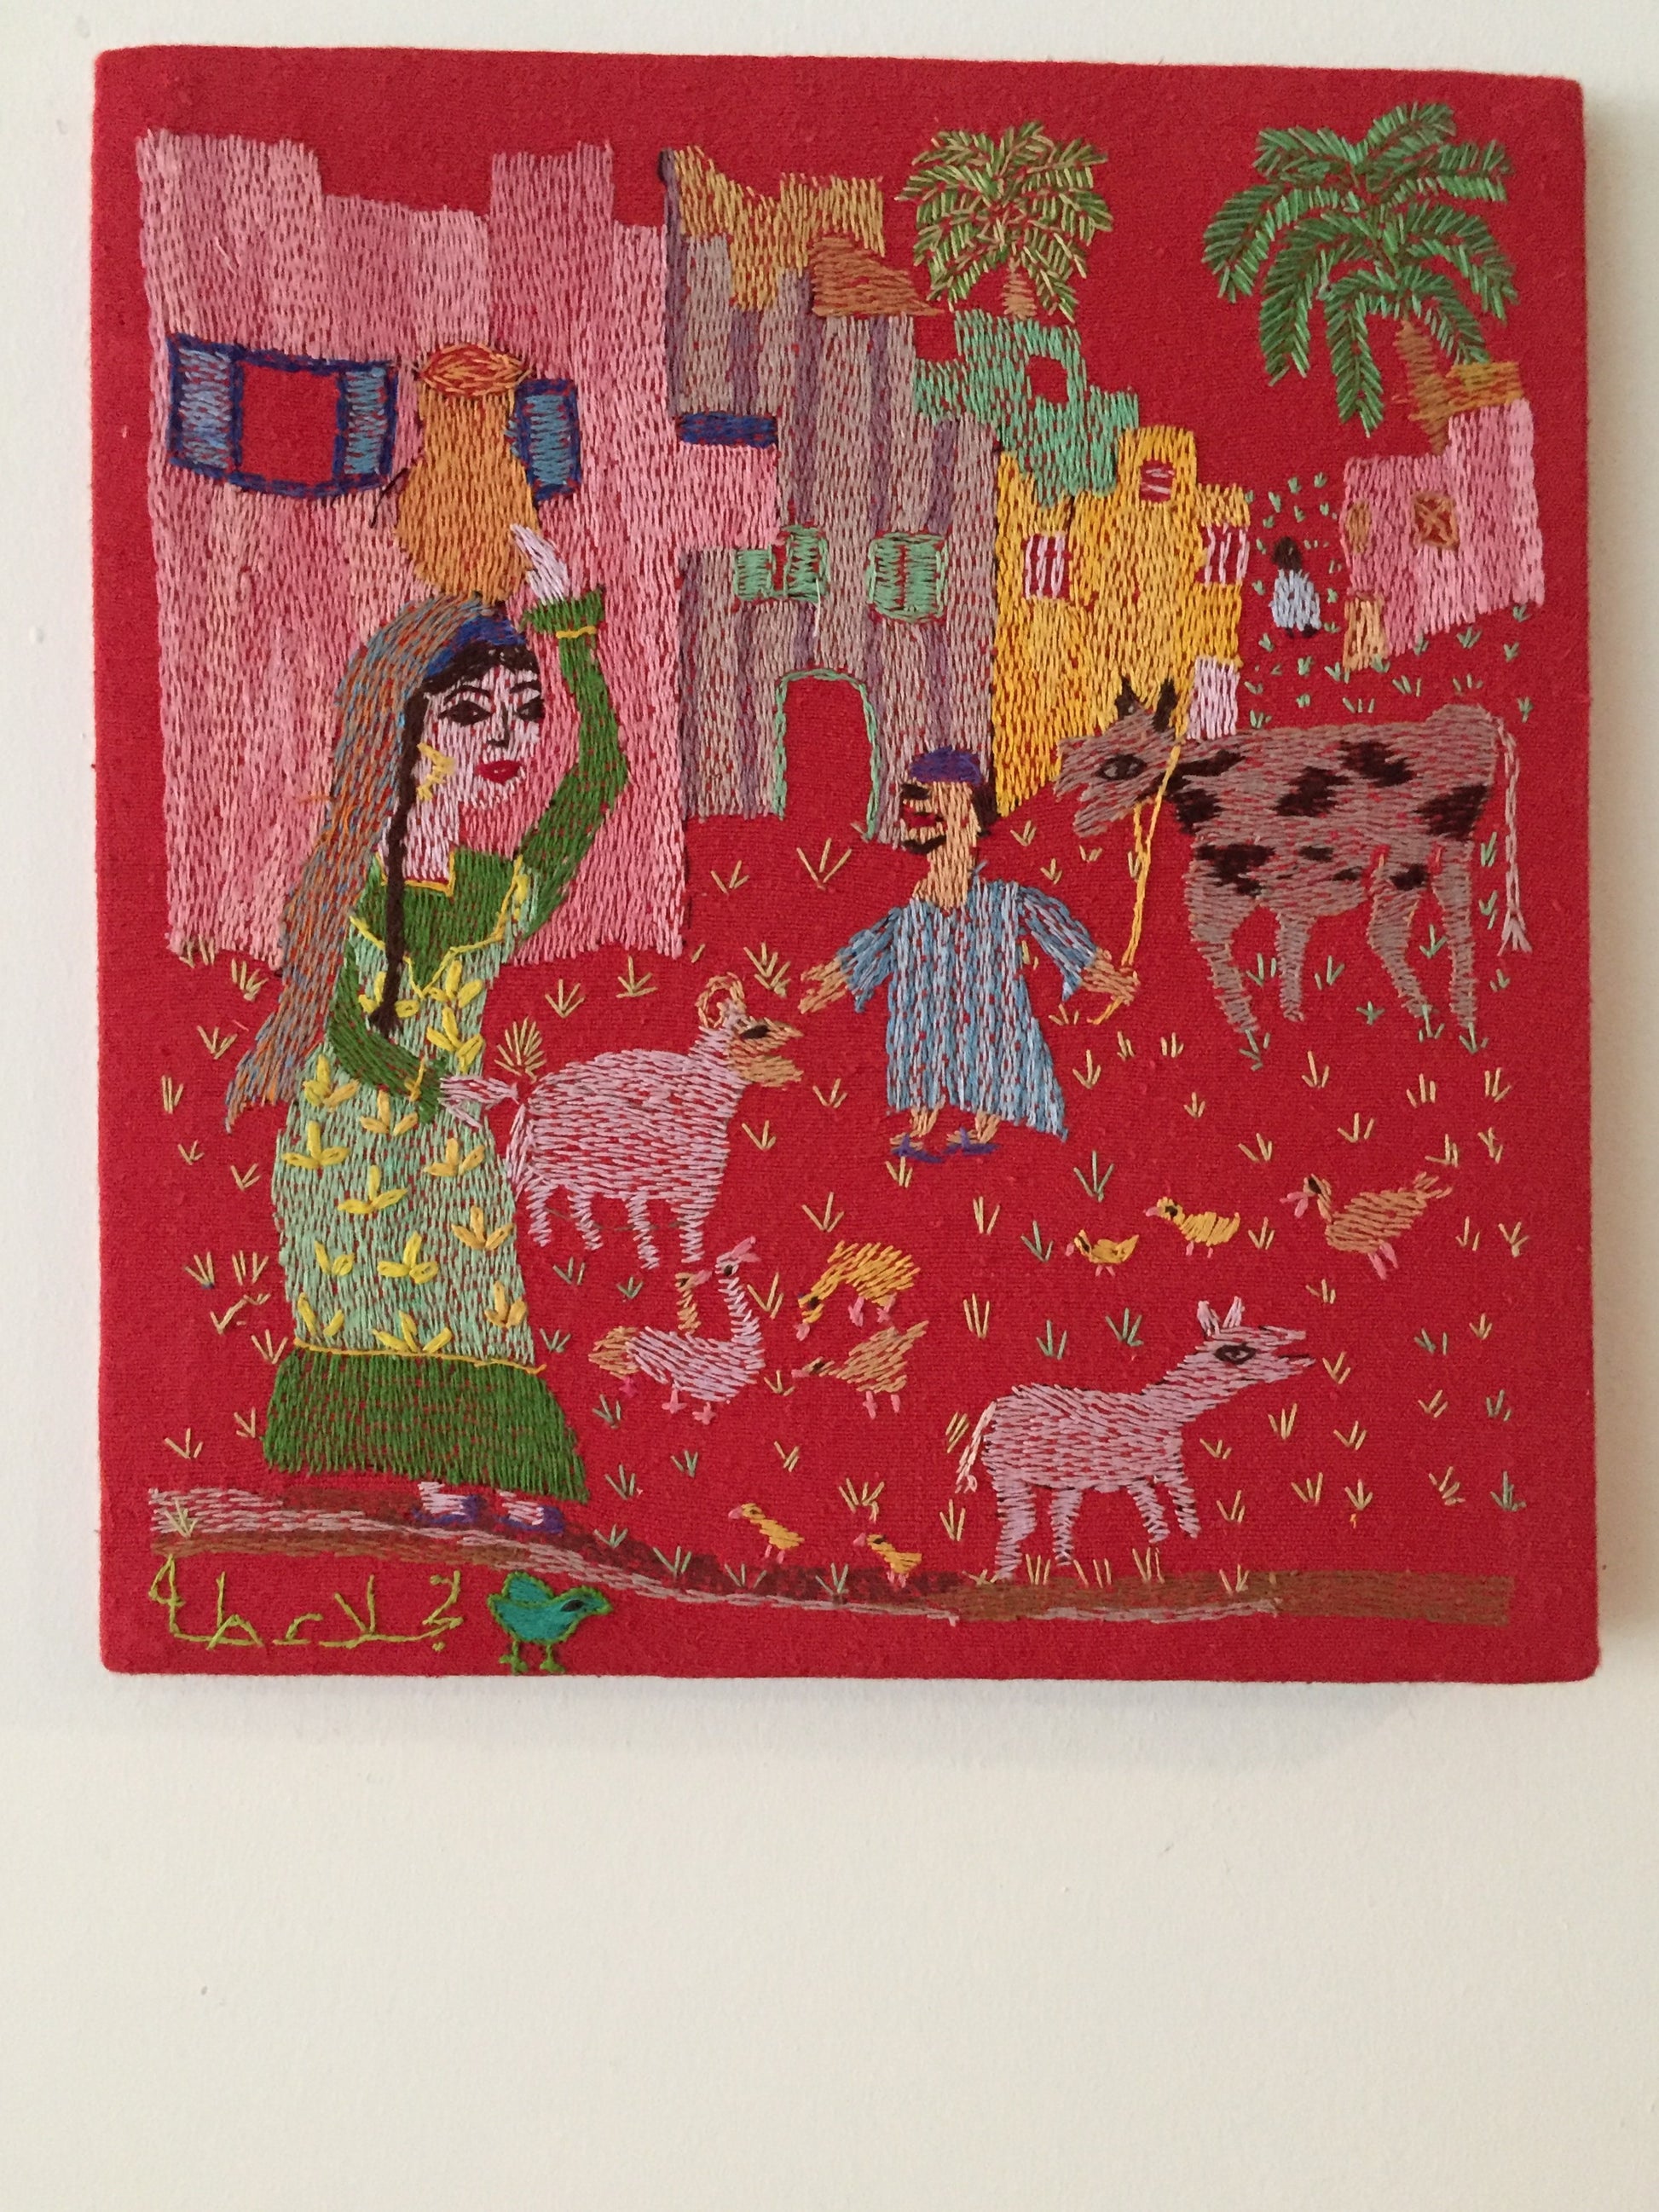 Hand Embroidered Tapestry - The Countryside by Naglaa Taha - Dandarah